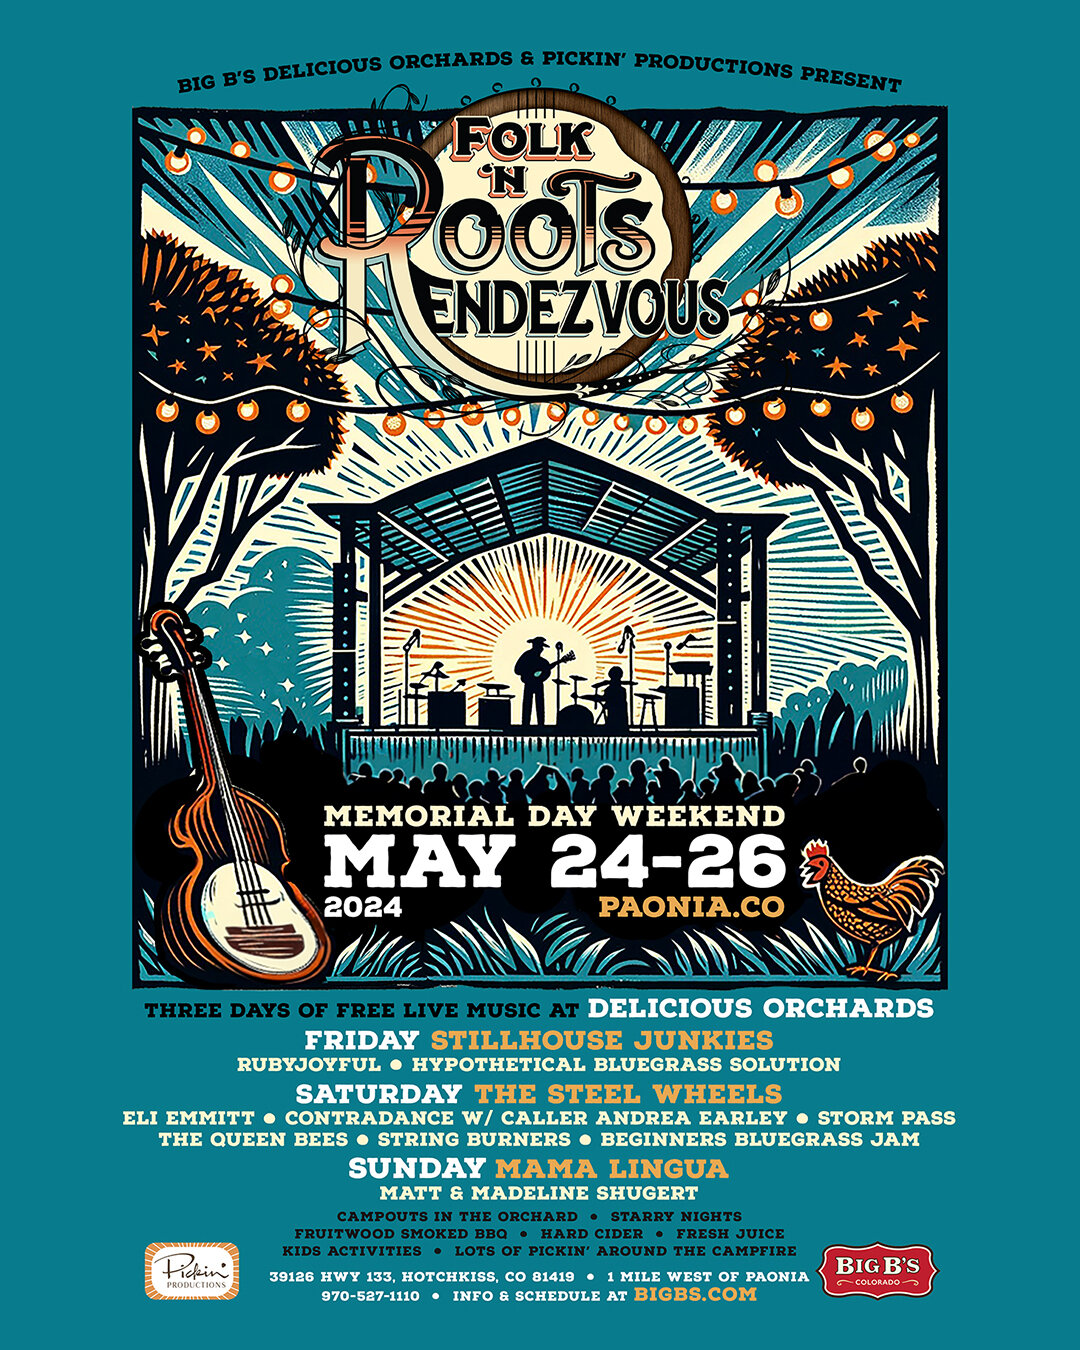 📣 ANNOUNCEMENT 🎹 @drinkbigbs and Pickin' Productions present Folk 'n Roots Rendezvous 2024. Three days of FREE LIVE MUSIC at Delicious Orchards over Memorial Day weekend. 

Our stellar lineup includes:
@thesteelwheels 
@stillhousejunkies 
@elicemmi